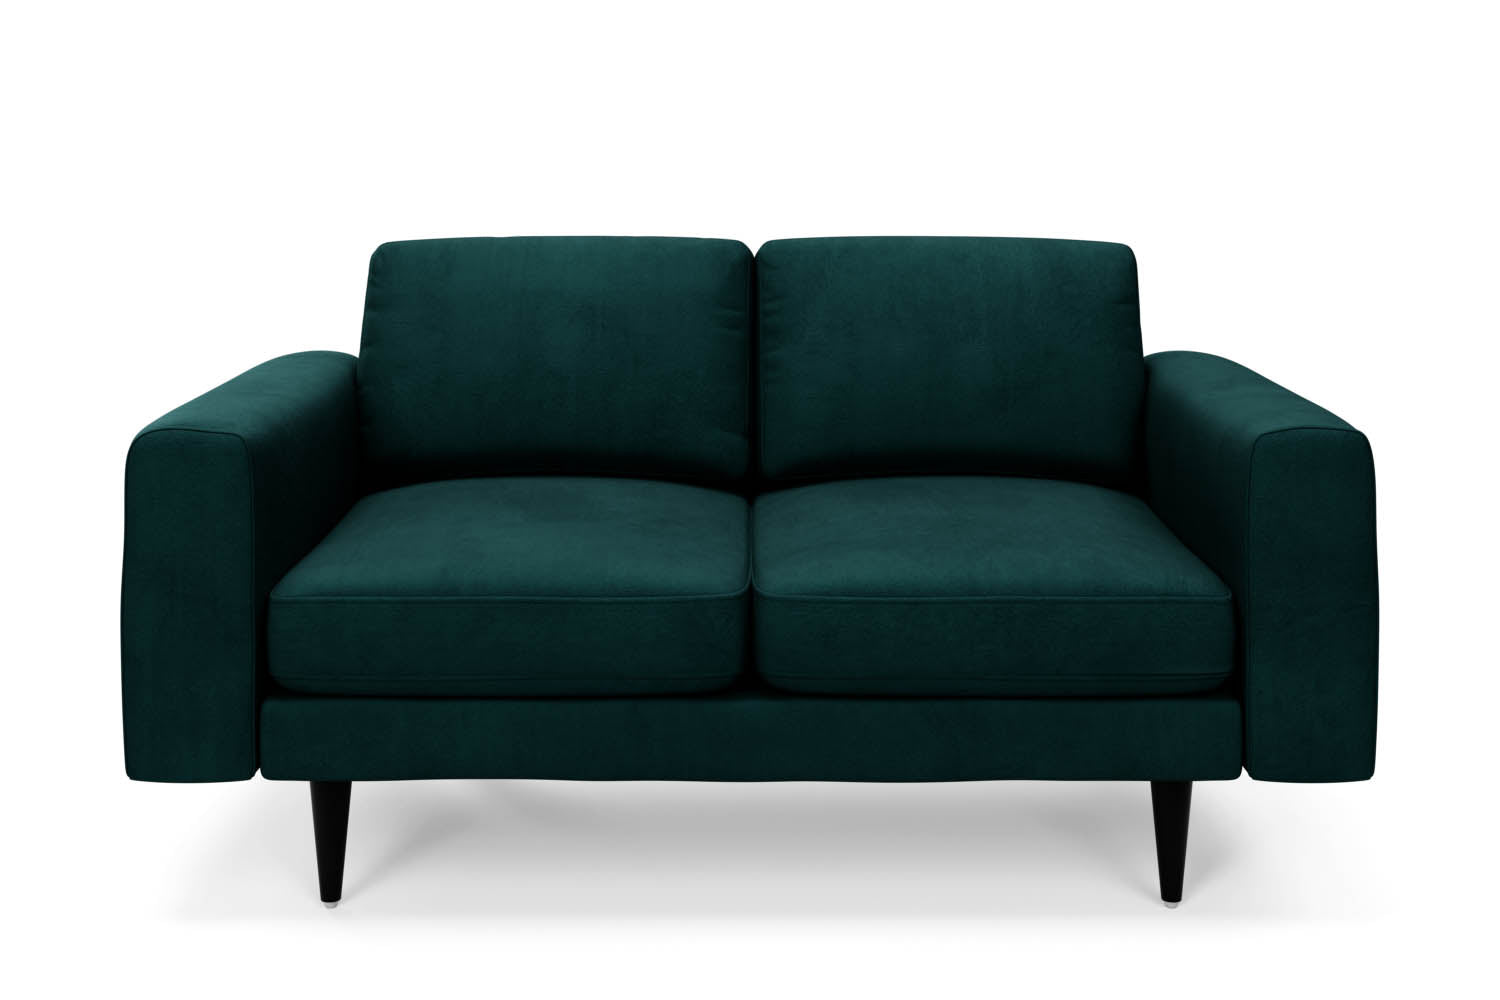 SNUG | The Big Chill 2 Seater Sofa in Pine Green variant_40837198512176